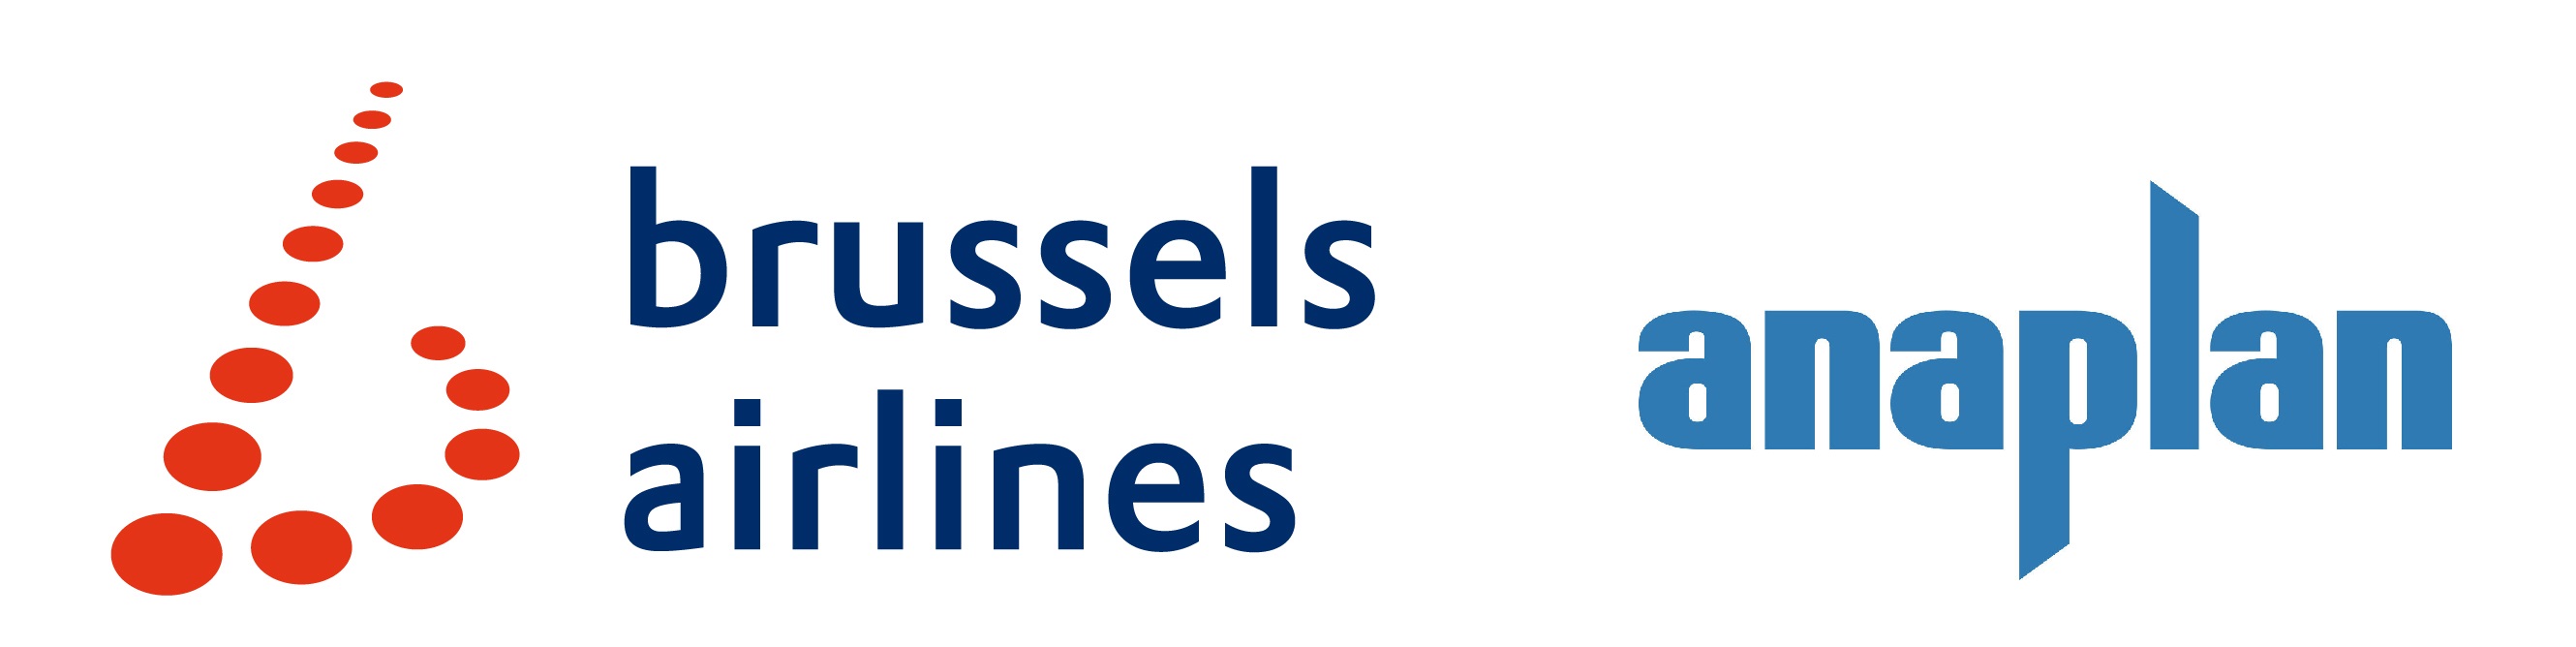 Brussels Airlines Chooses Anaplan for Heightened Financial Planning and Analysis